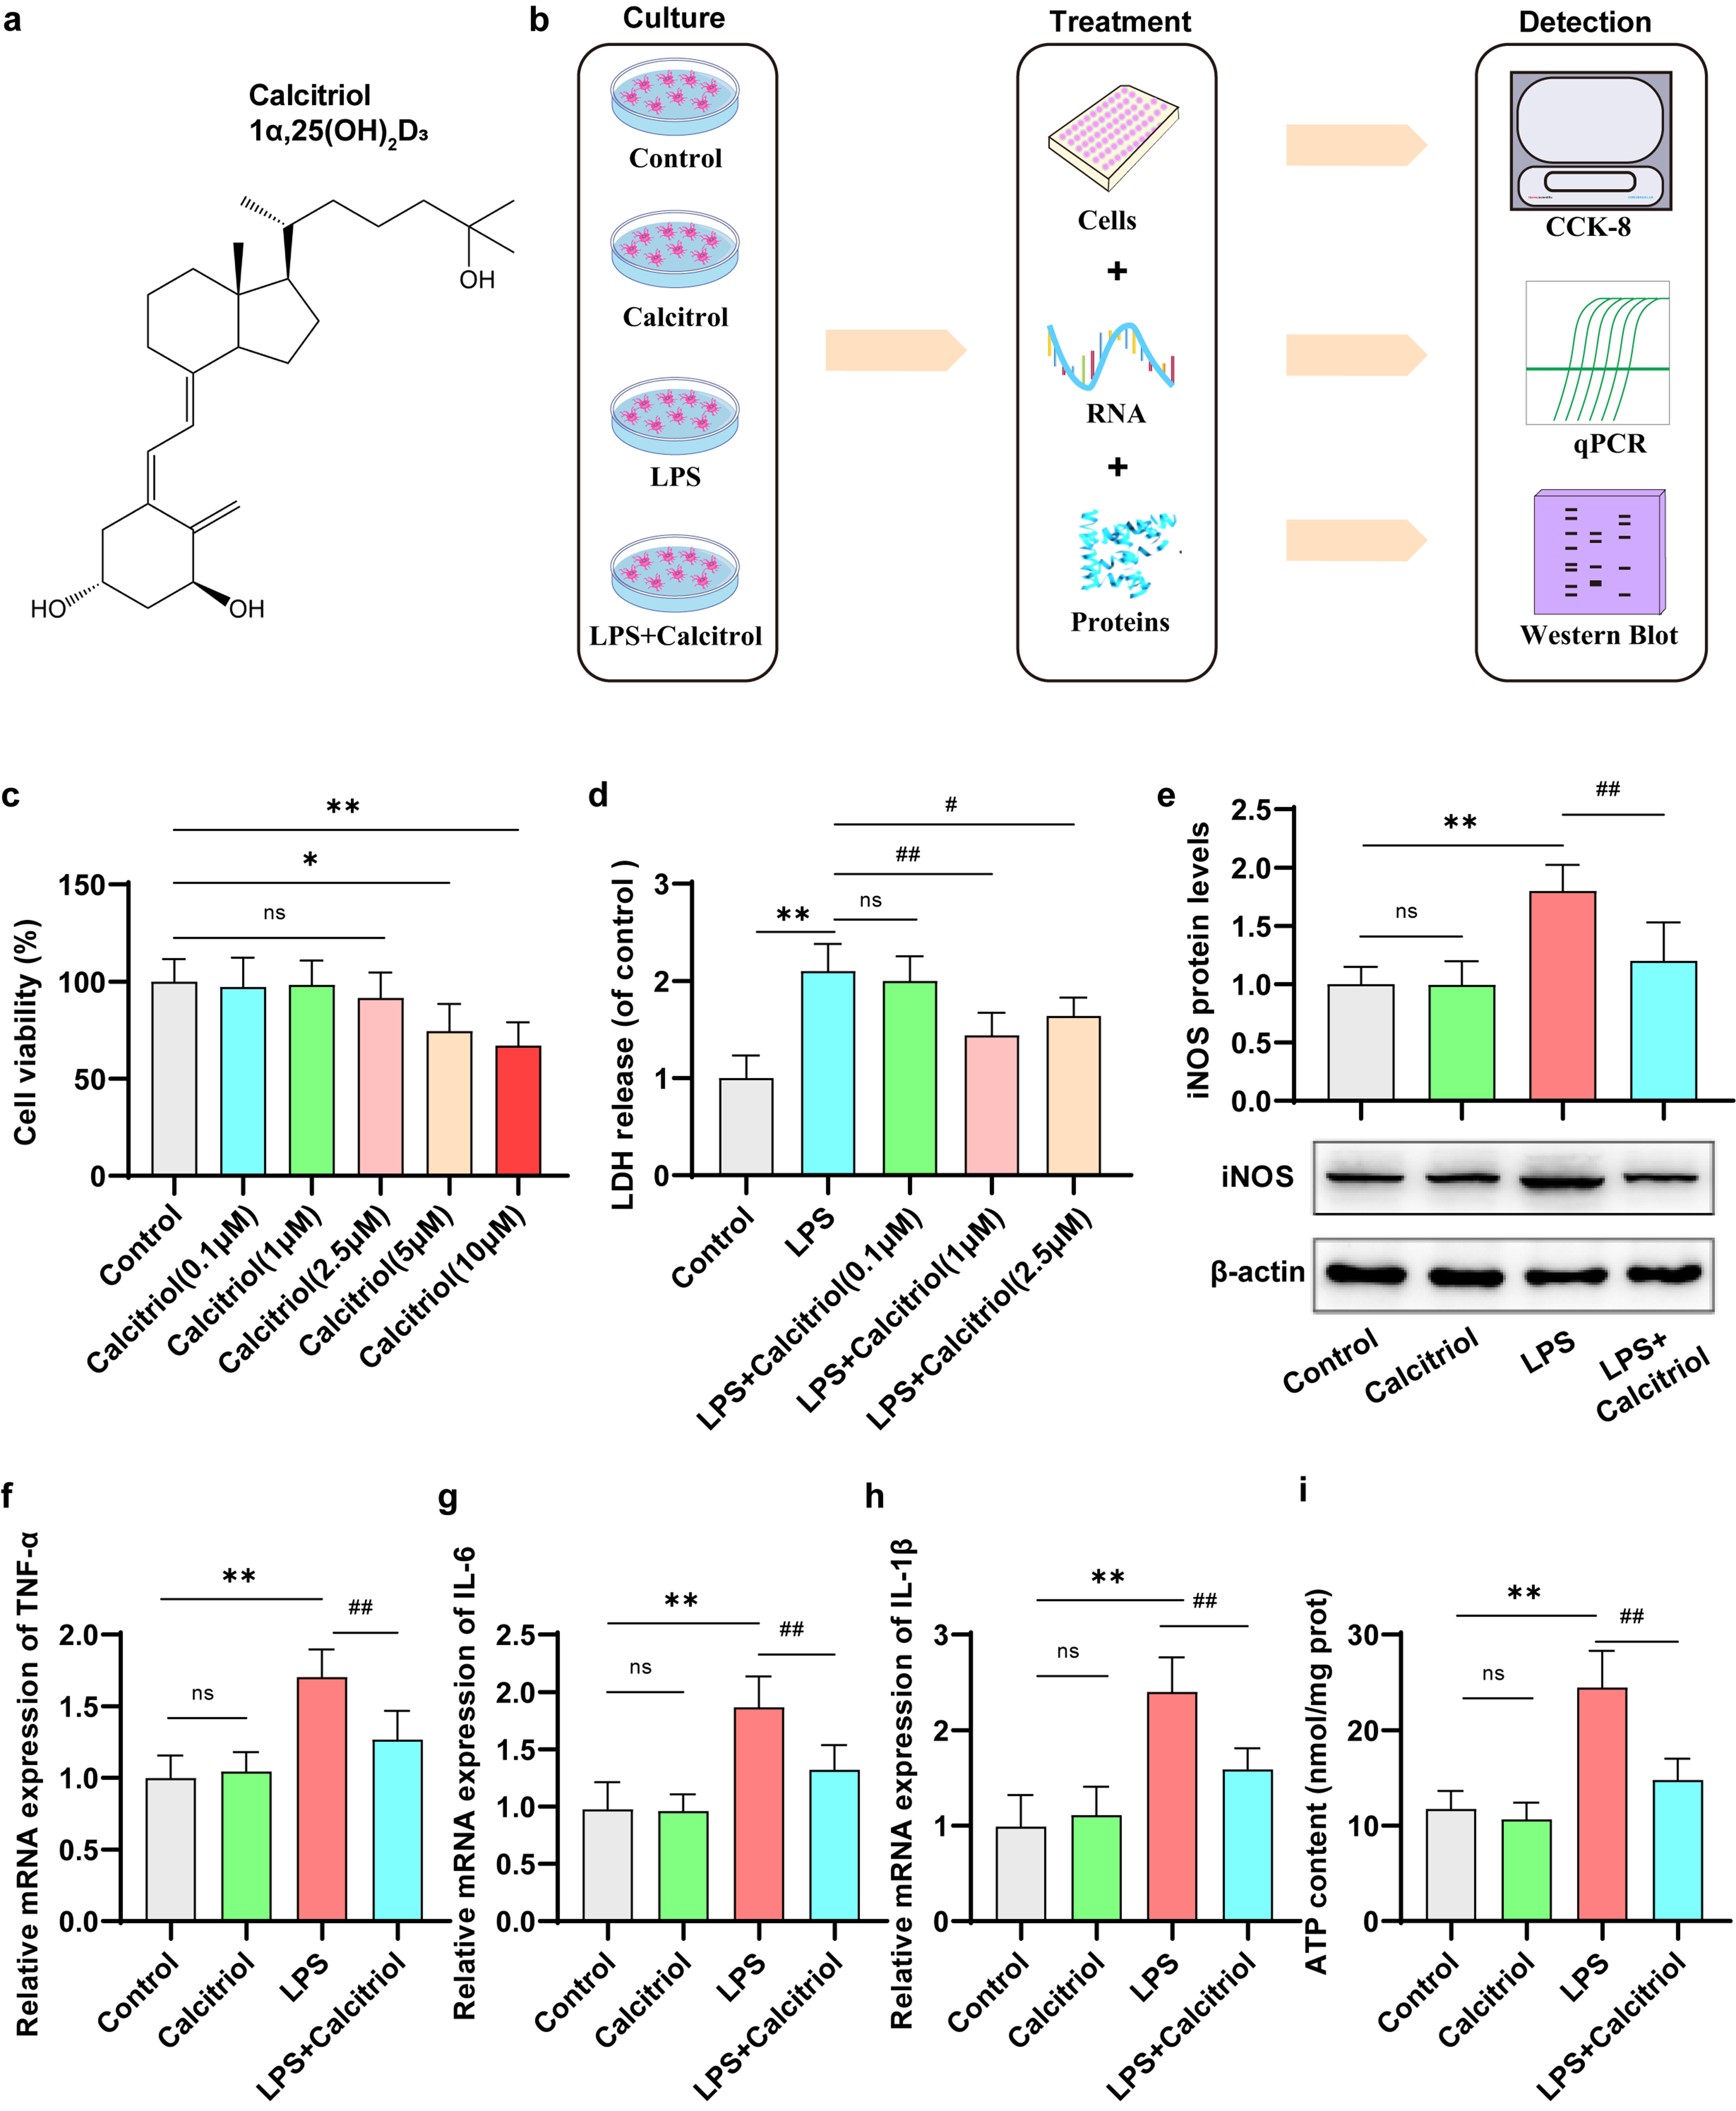 Calcitriol attenuates lipopolysaccharide-induced neuroinflammation and depressive-like behaviors by suppressing the P2X7R/NLRP3/caspase-1 pathway